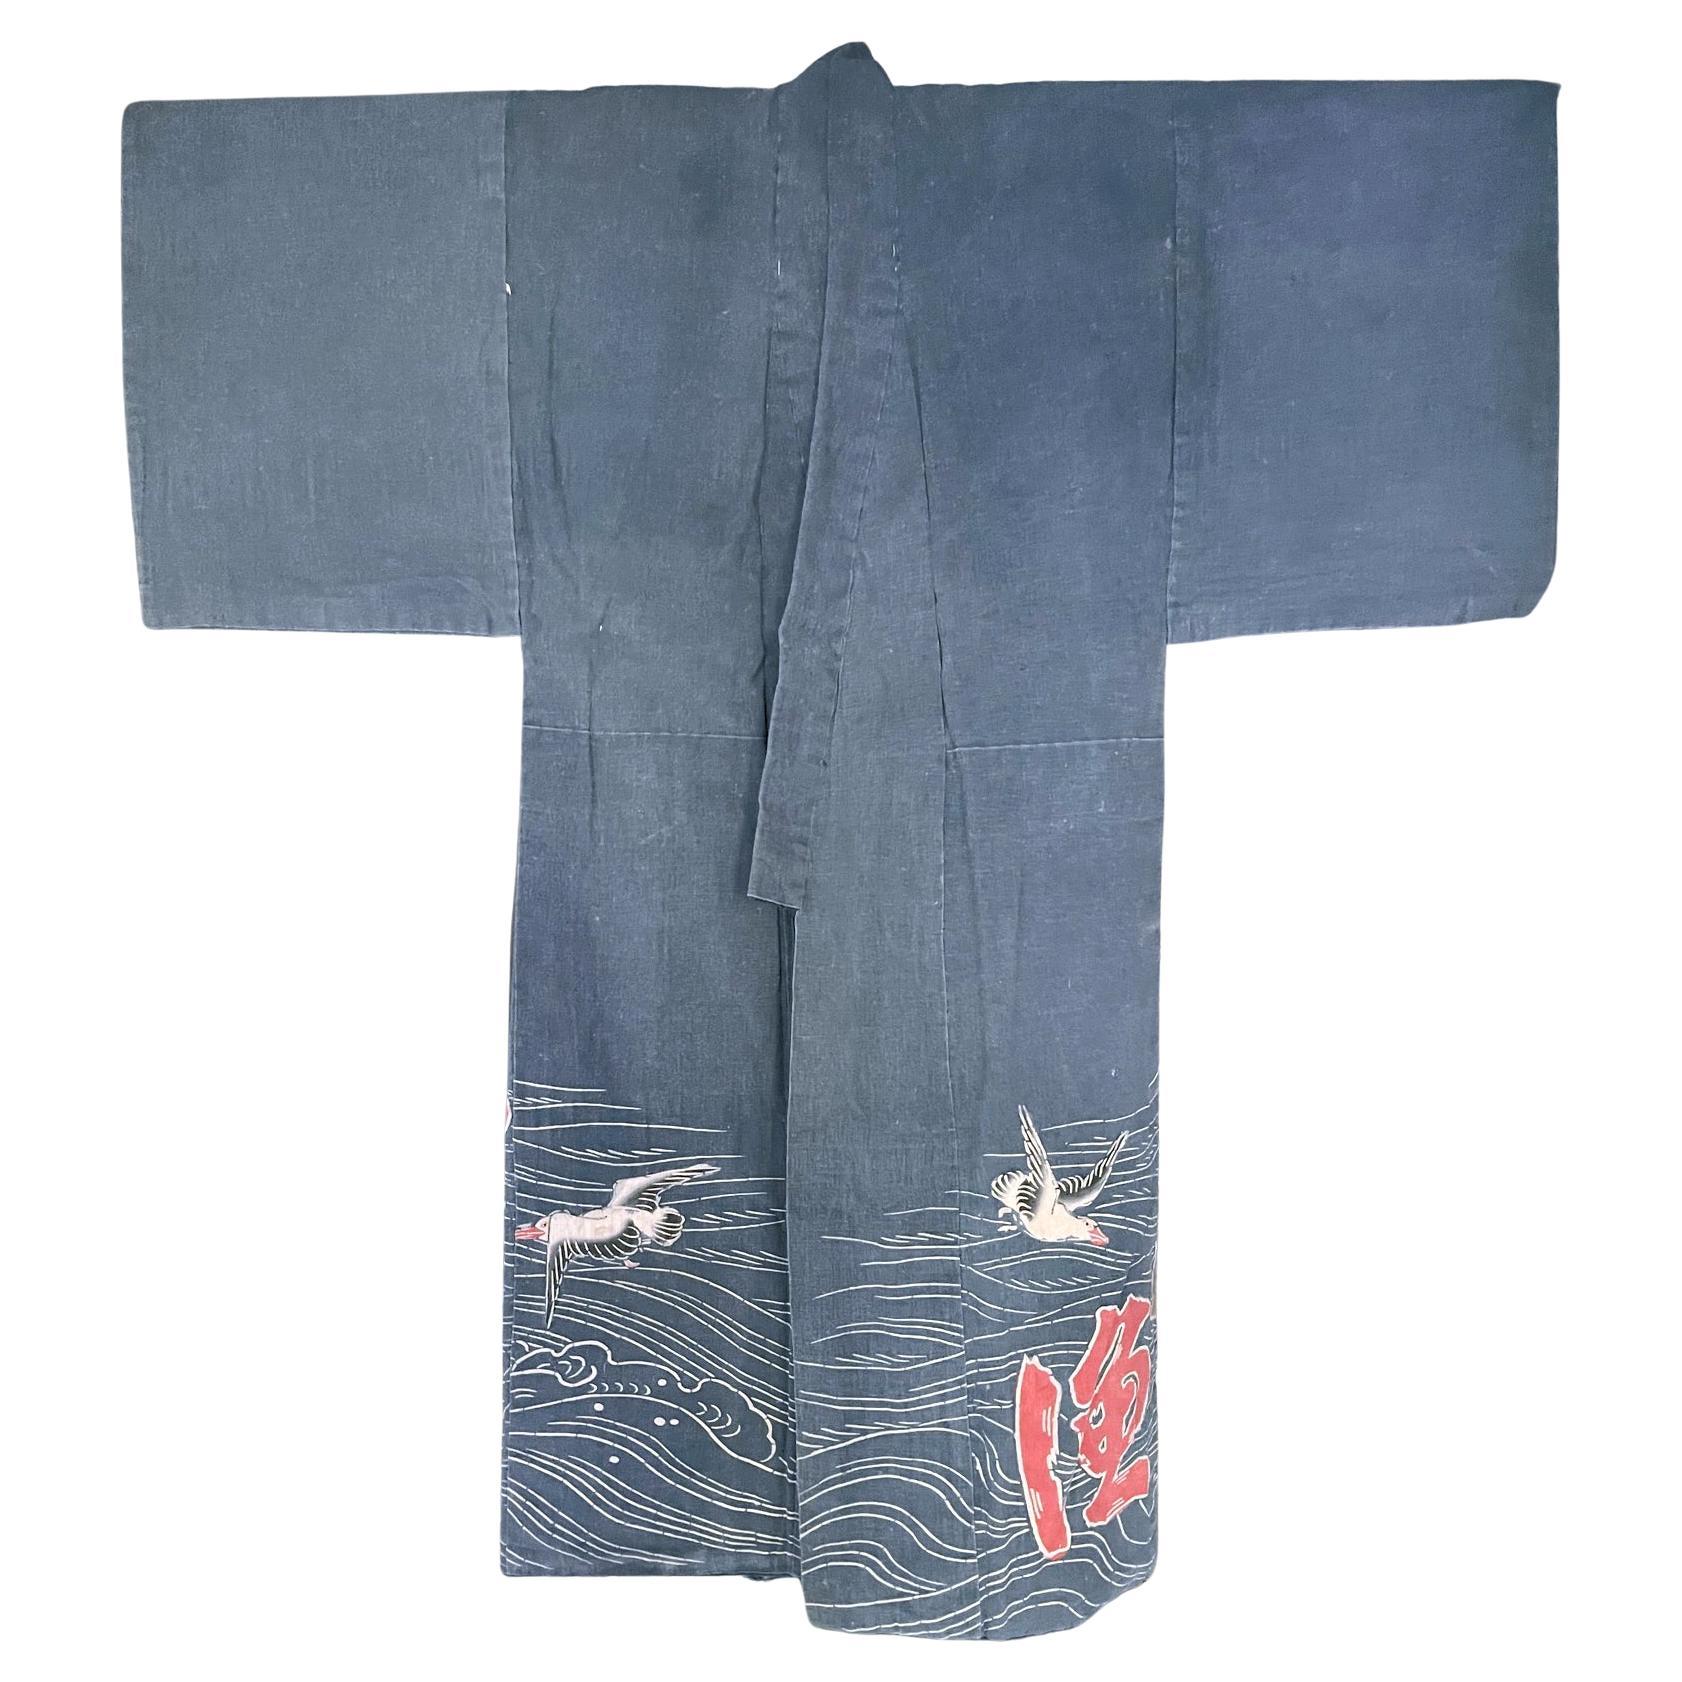 A Japanese festival Kimono robe circa late 19th to early 20th century (end of Meiji Period) for fishing ritual. Made in a cotton fabric, the kimono was elaborately decorated by Tsutsugaki, a free-hand resistant dye to create desired motifs. As a